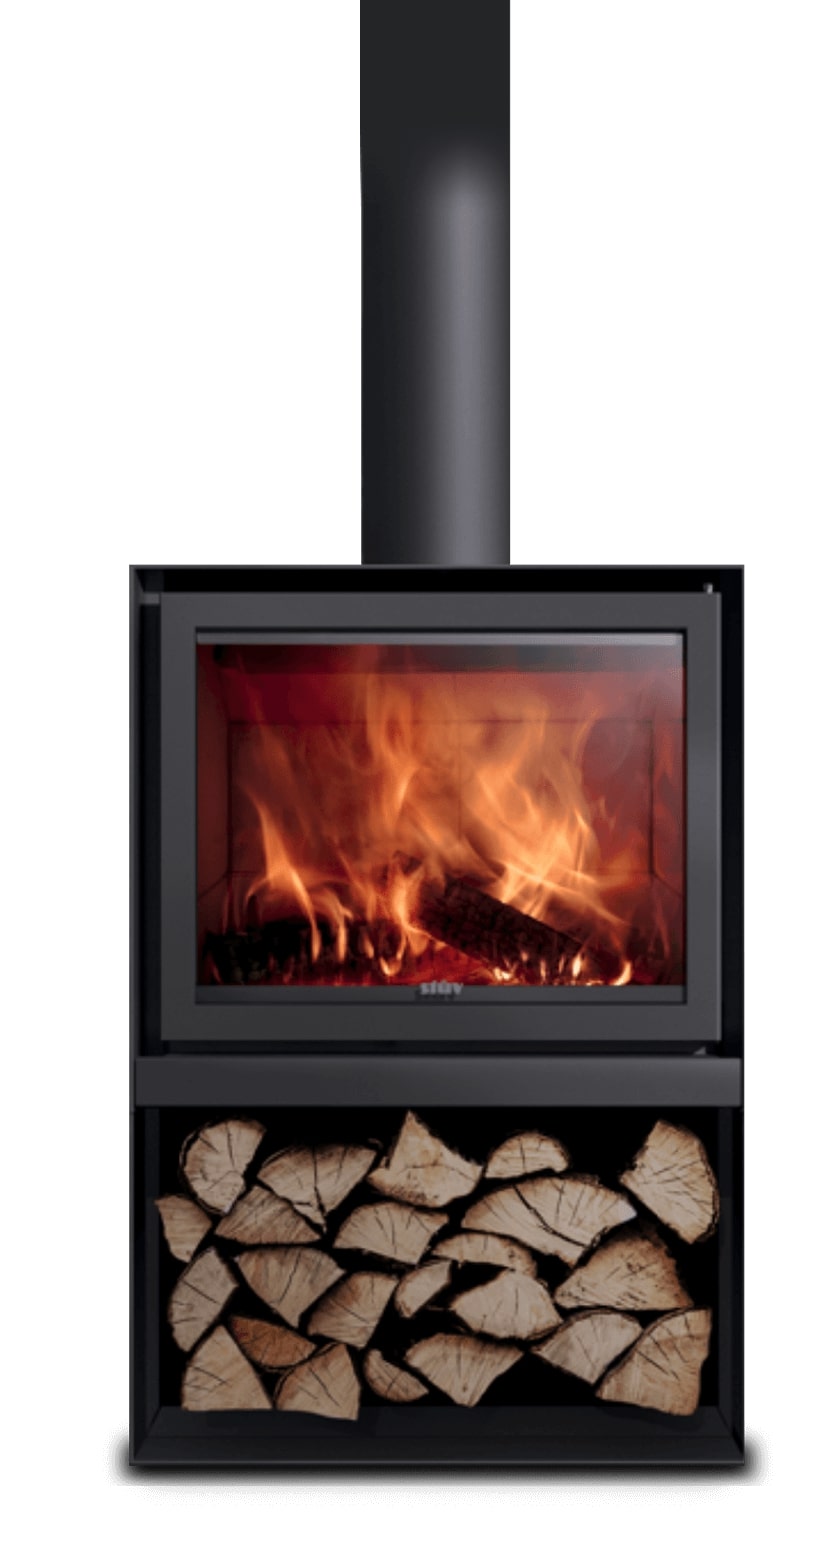 The Stûv 16 wood stoves stand out for their perfectly balanced straight lines that showcase the beauty of the flames.